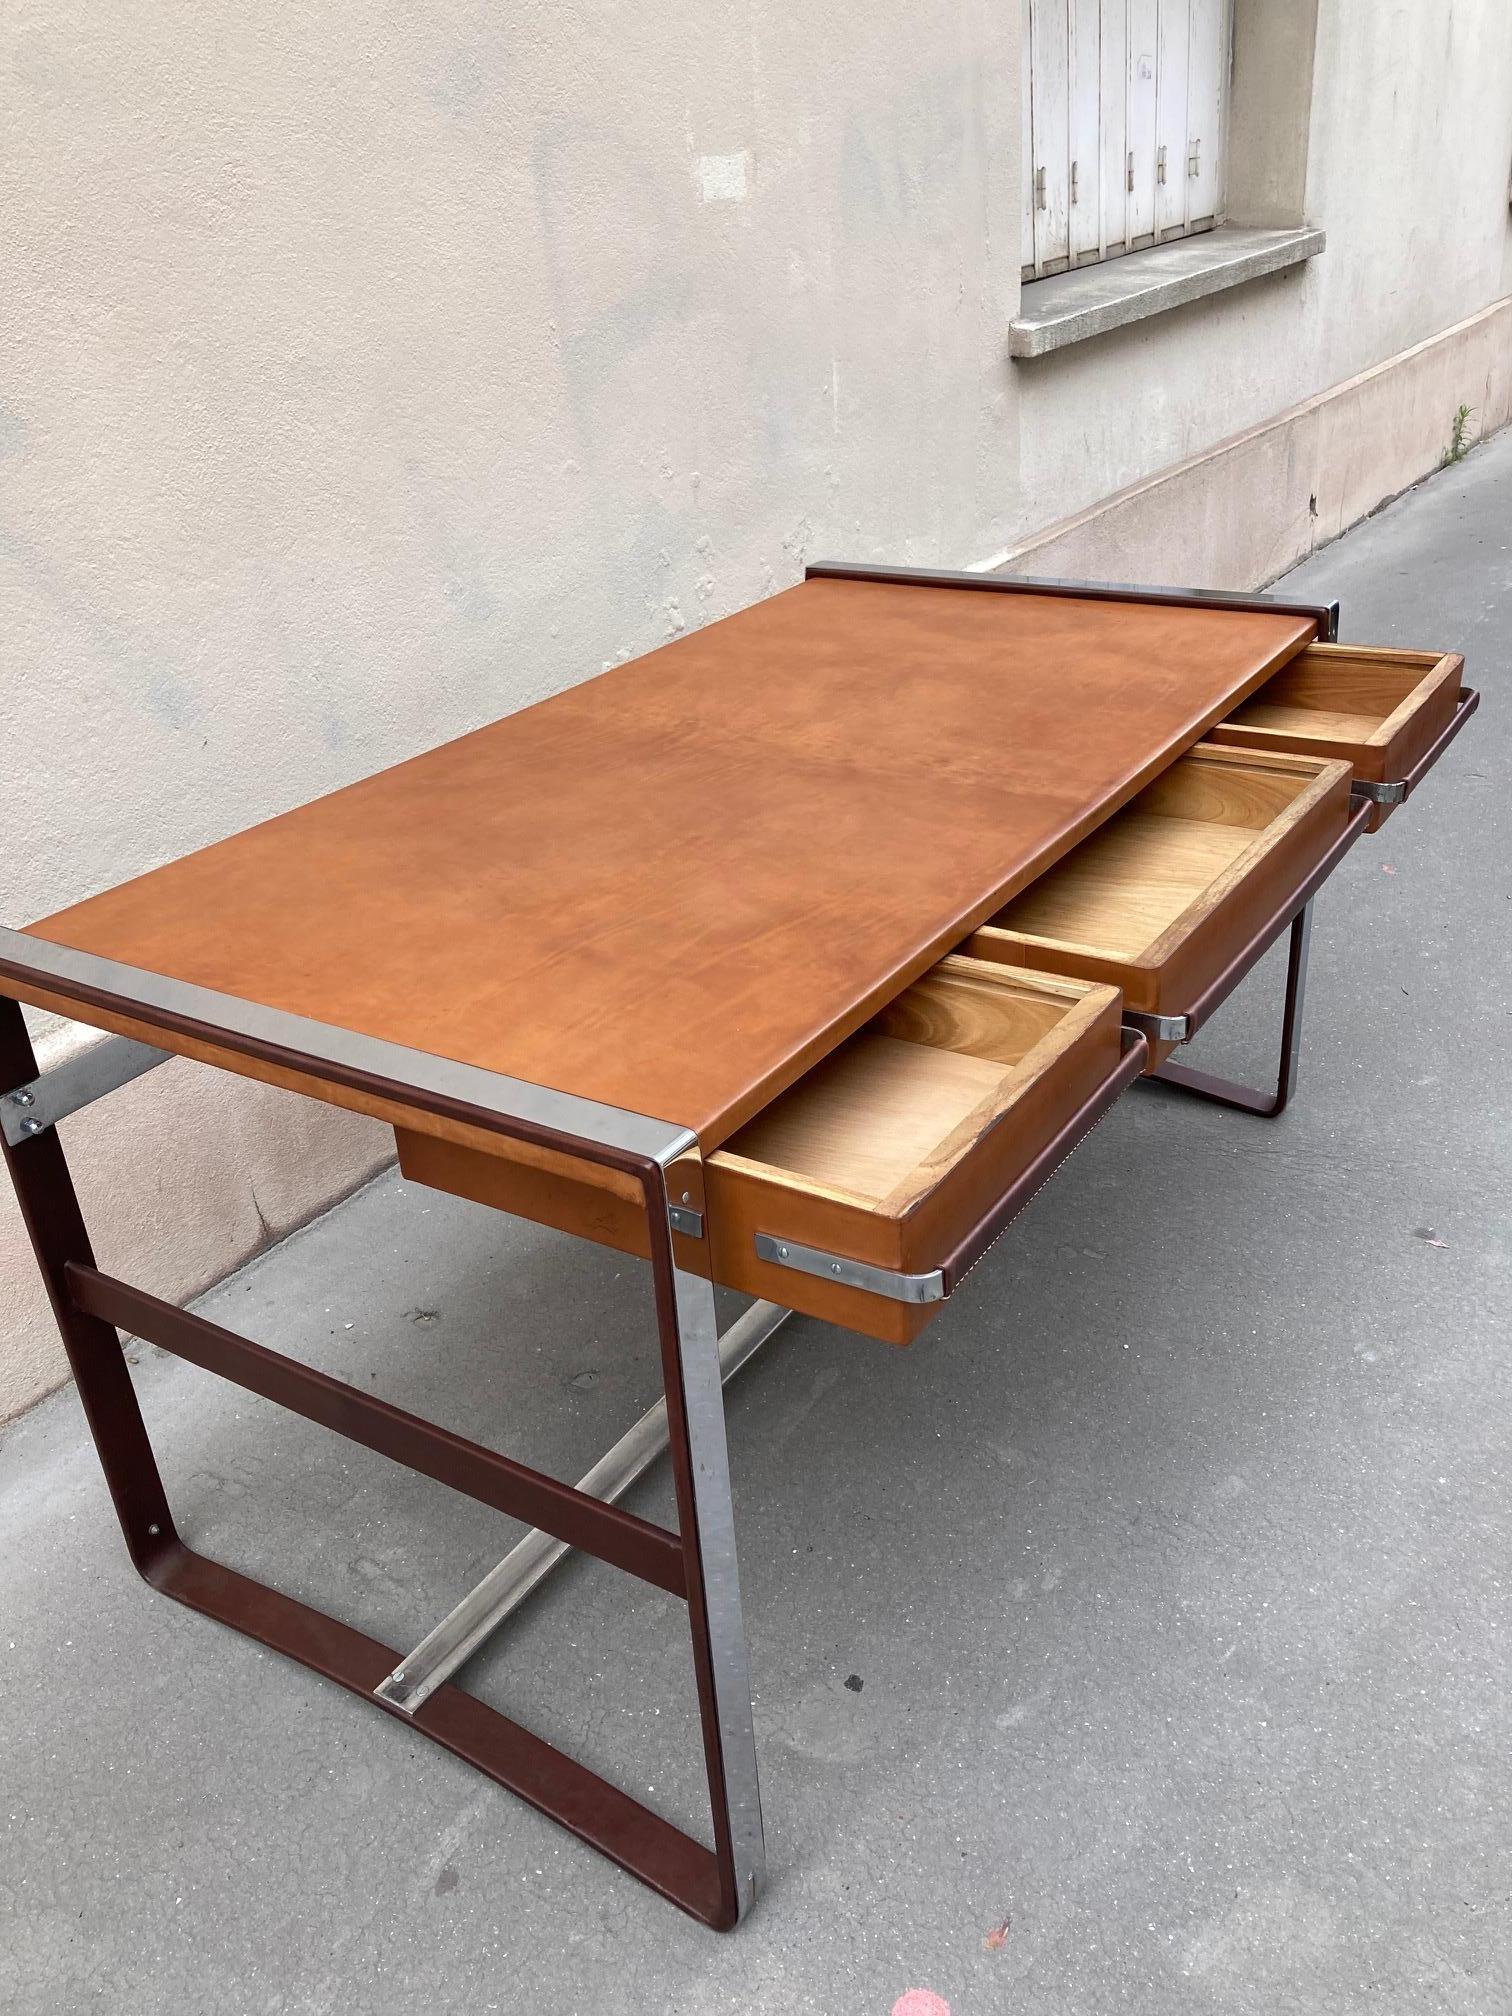 1950's Stitched Leather Desk by Jacques Adnet For Sale 8